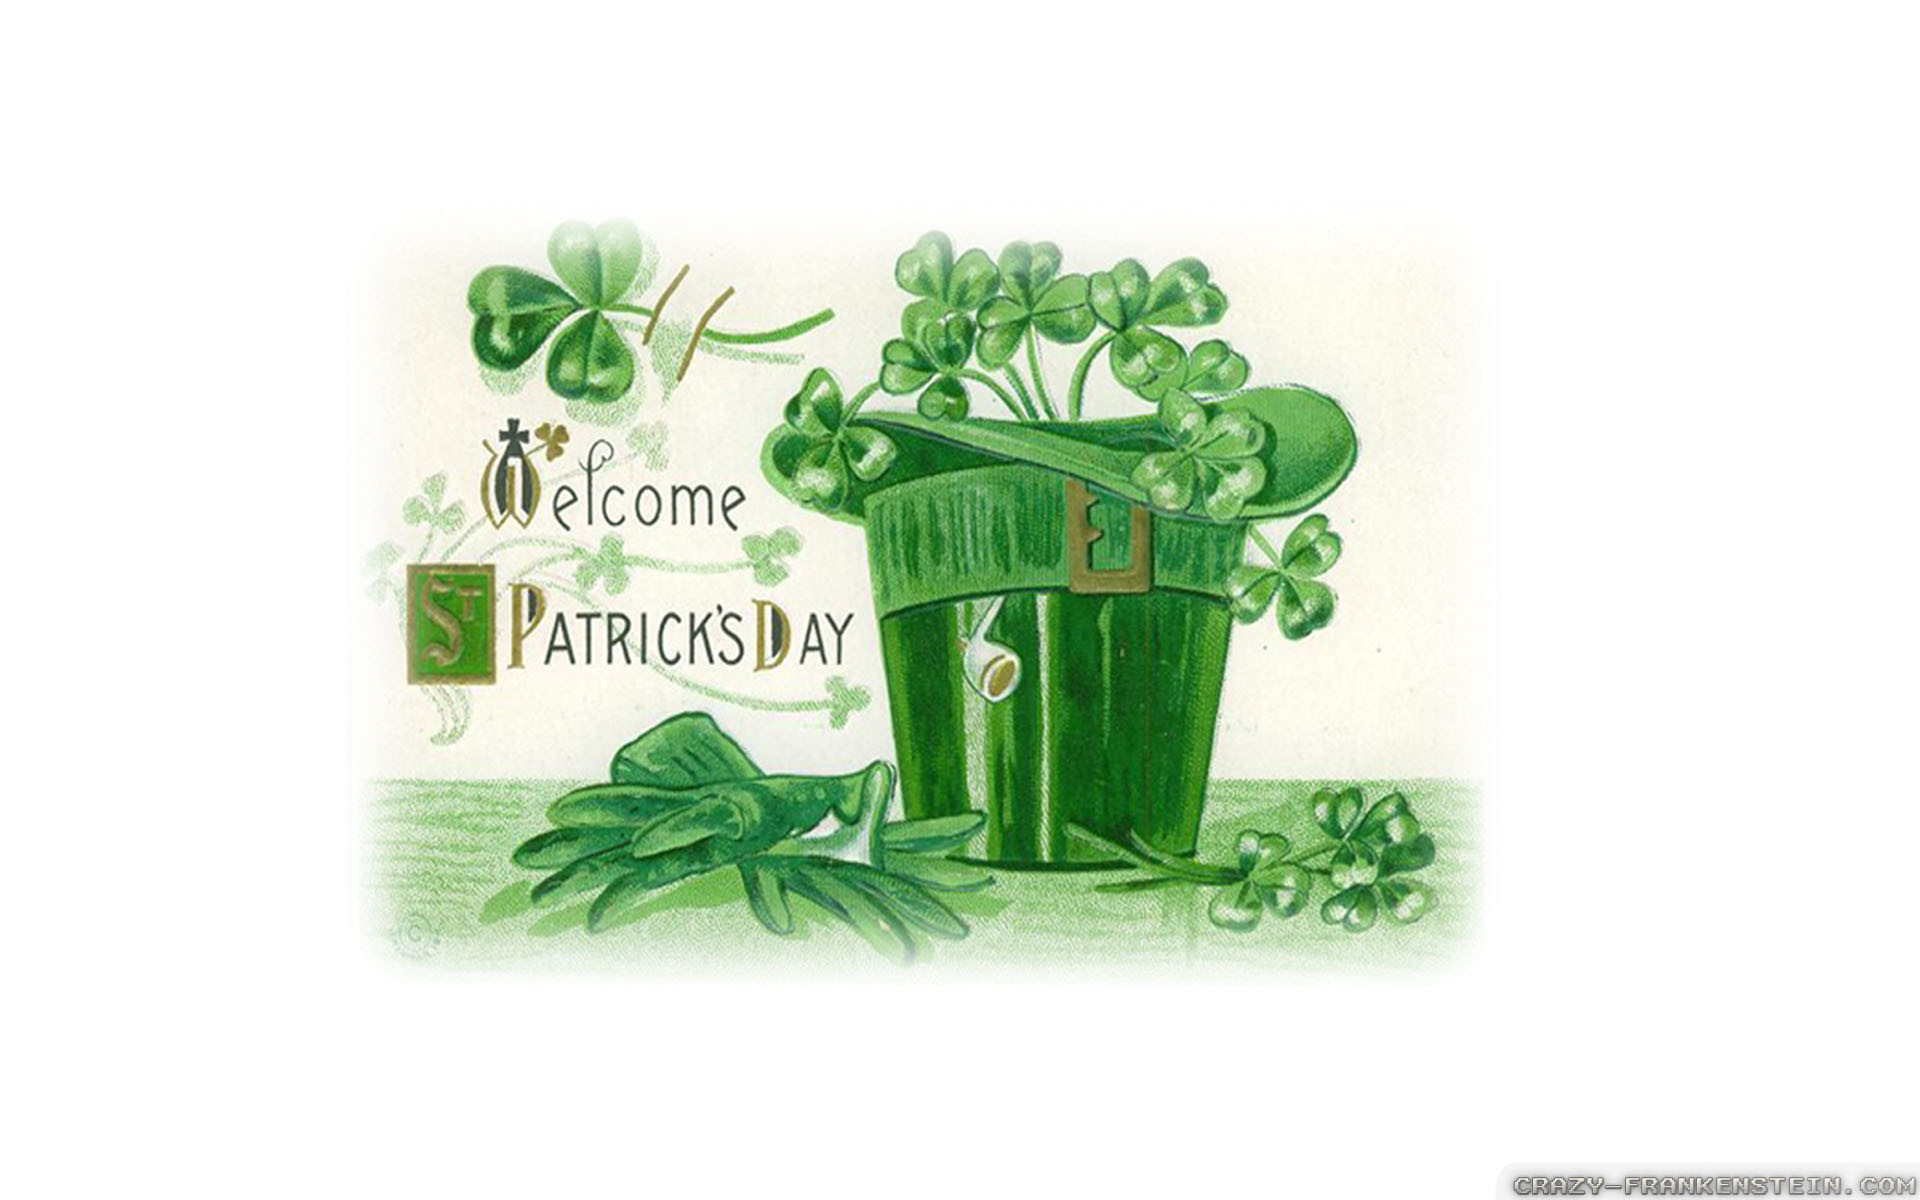 1920x1200 The 25+ best St patricks day wallpaper ideas on Pinterest | St patrick's day  facts, St patrick's day sayings and March crafts